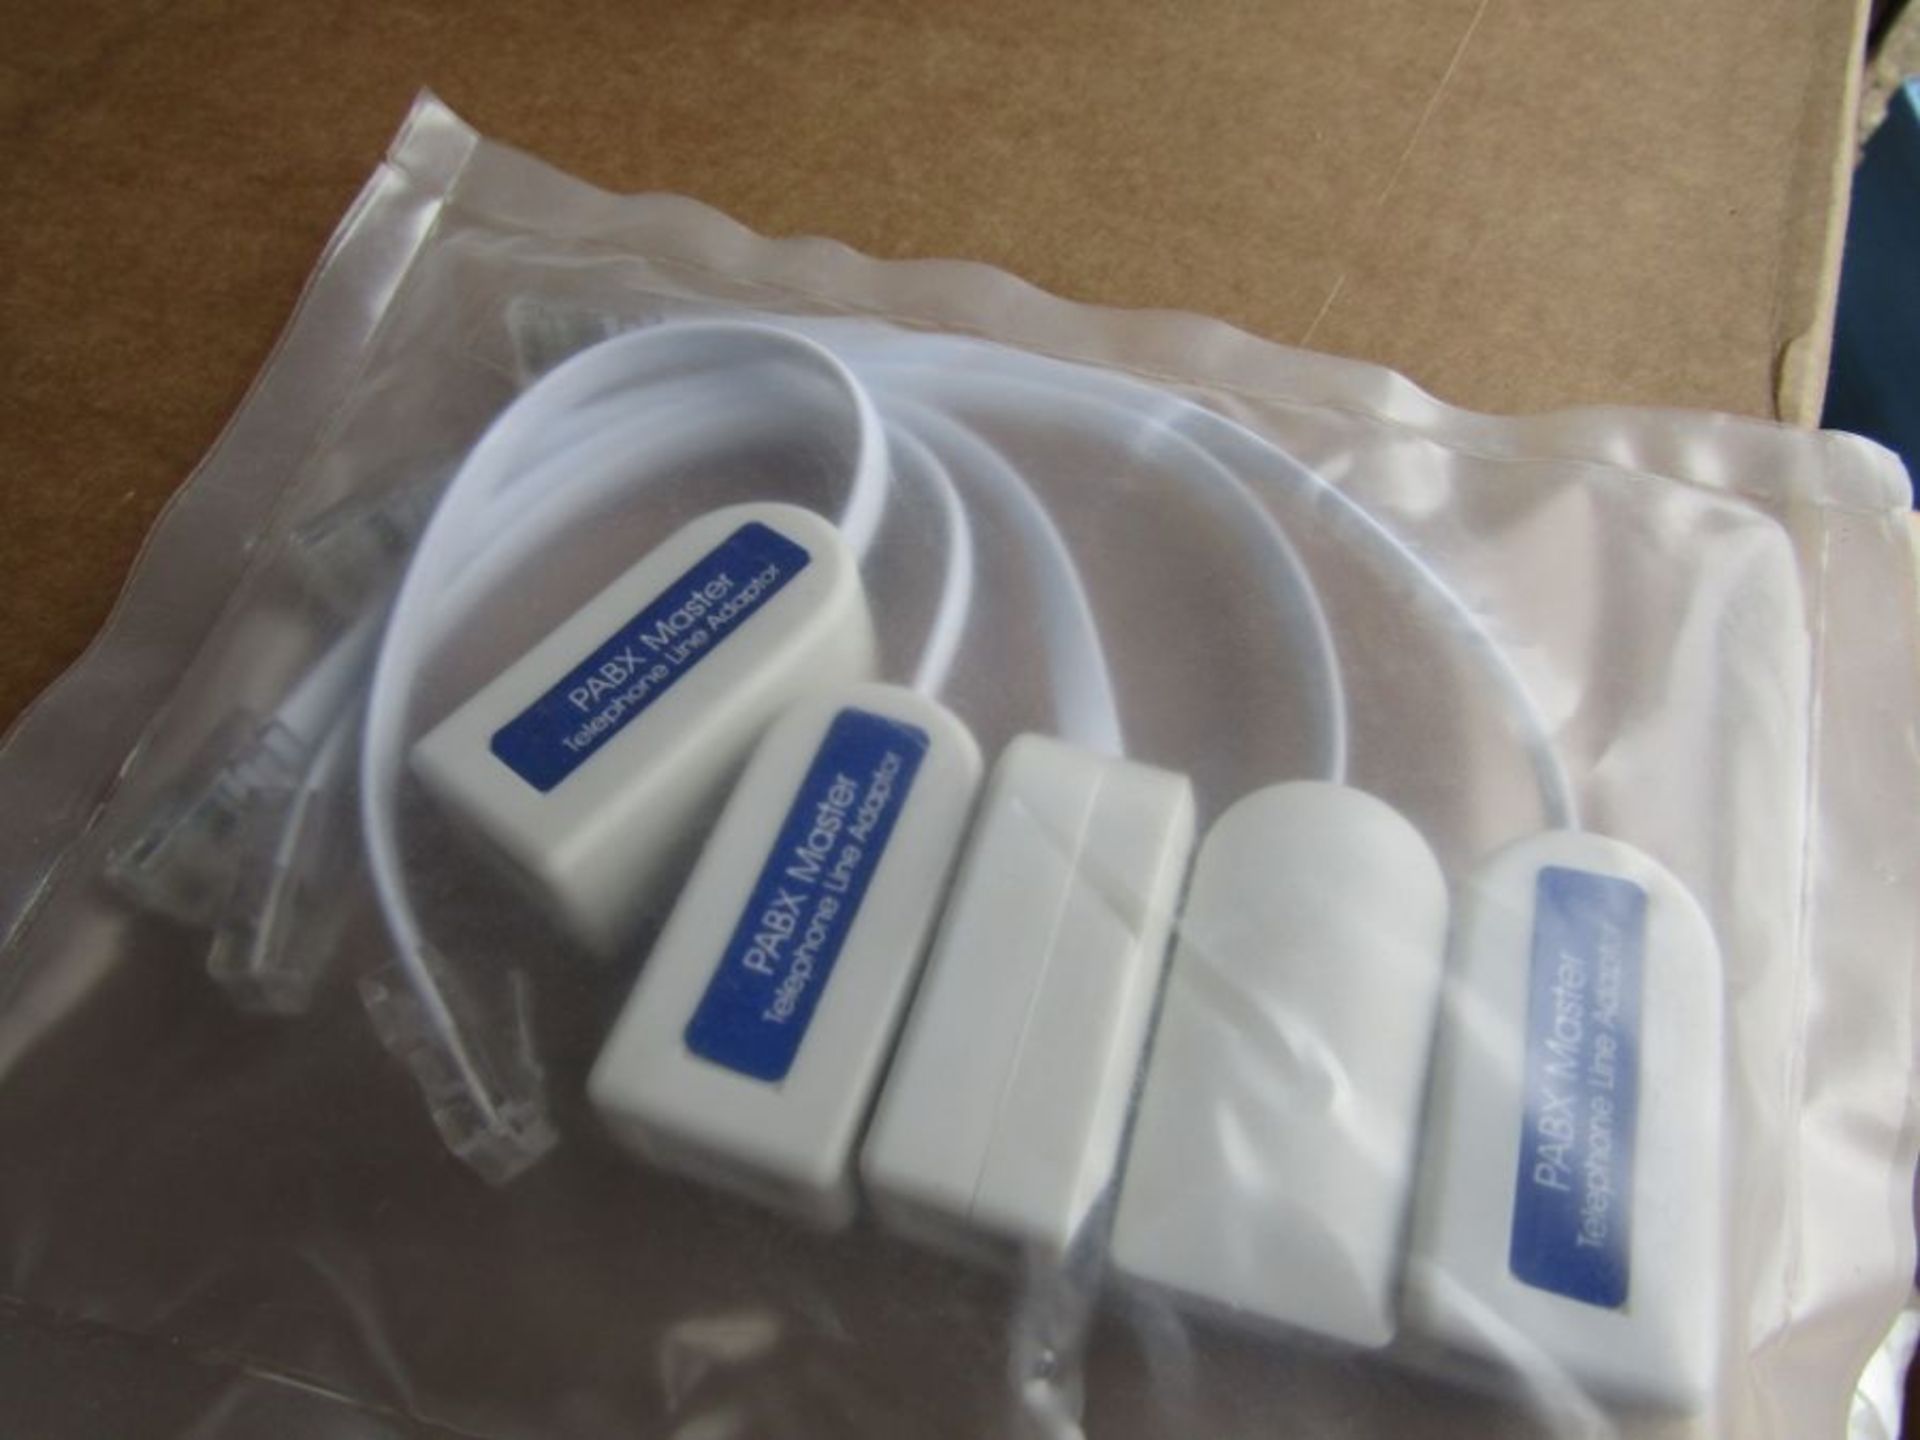 75 x RJ45 Telephone Line Adapter Unit PABX Master 160 mm - L1 4498467 - Image 2 of 3